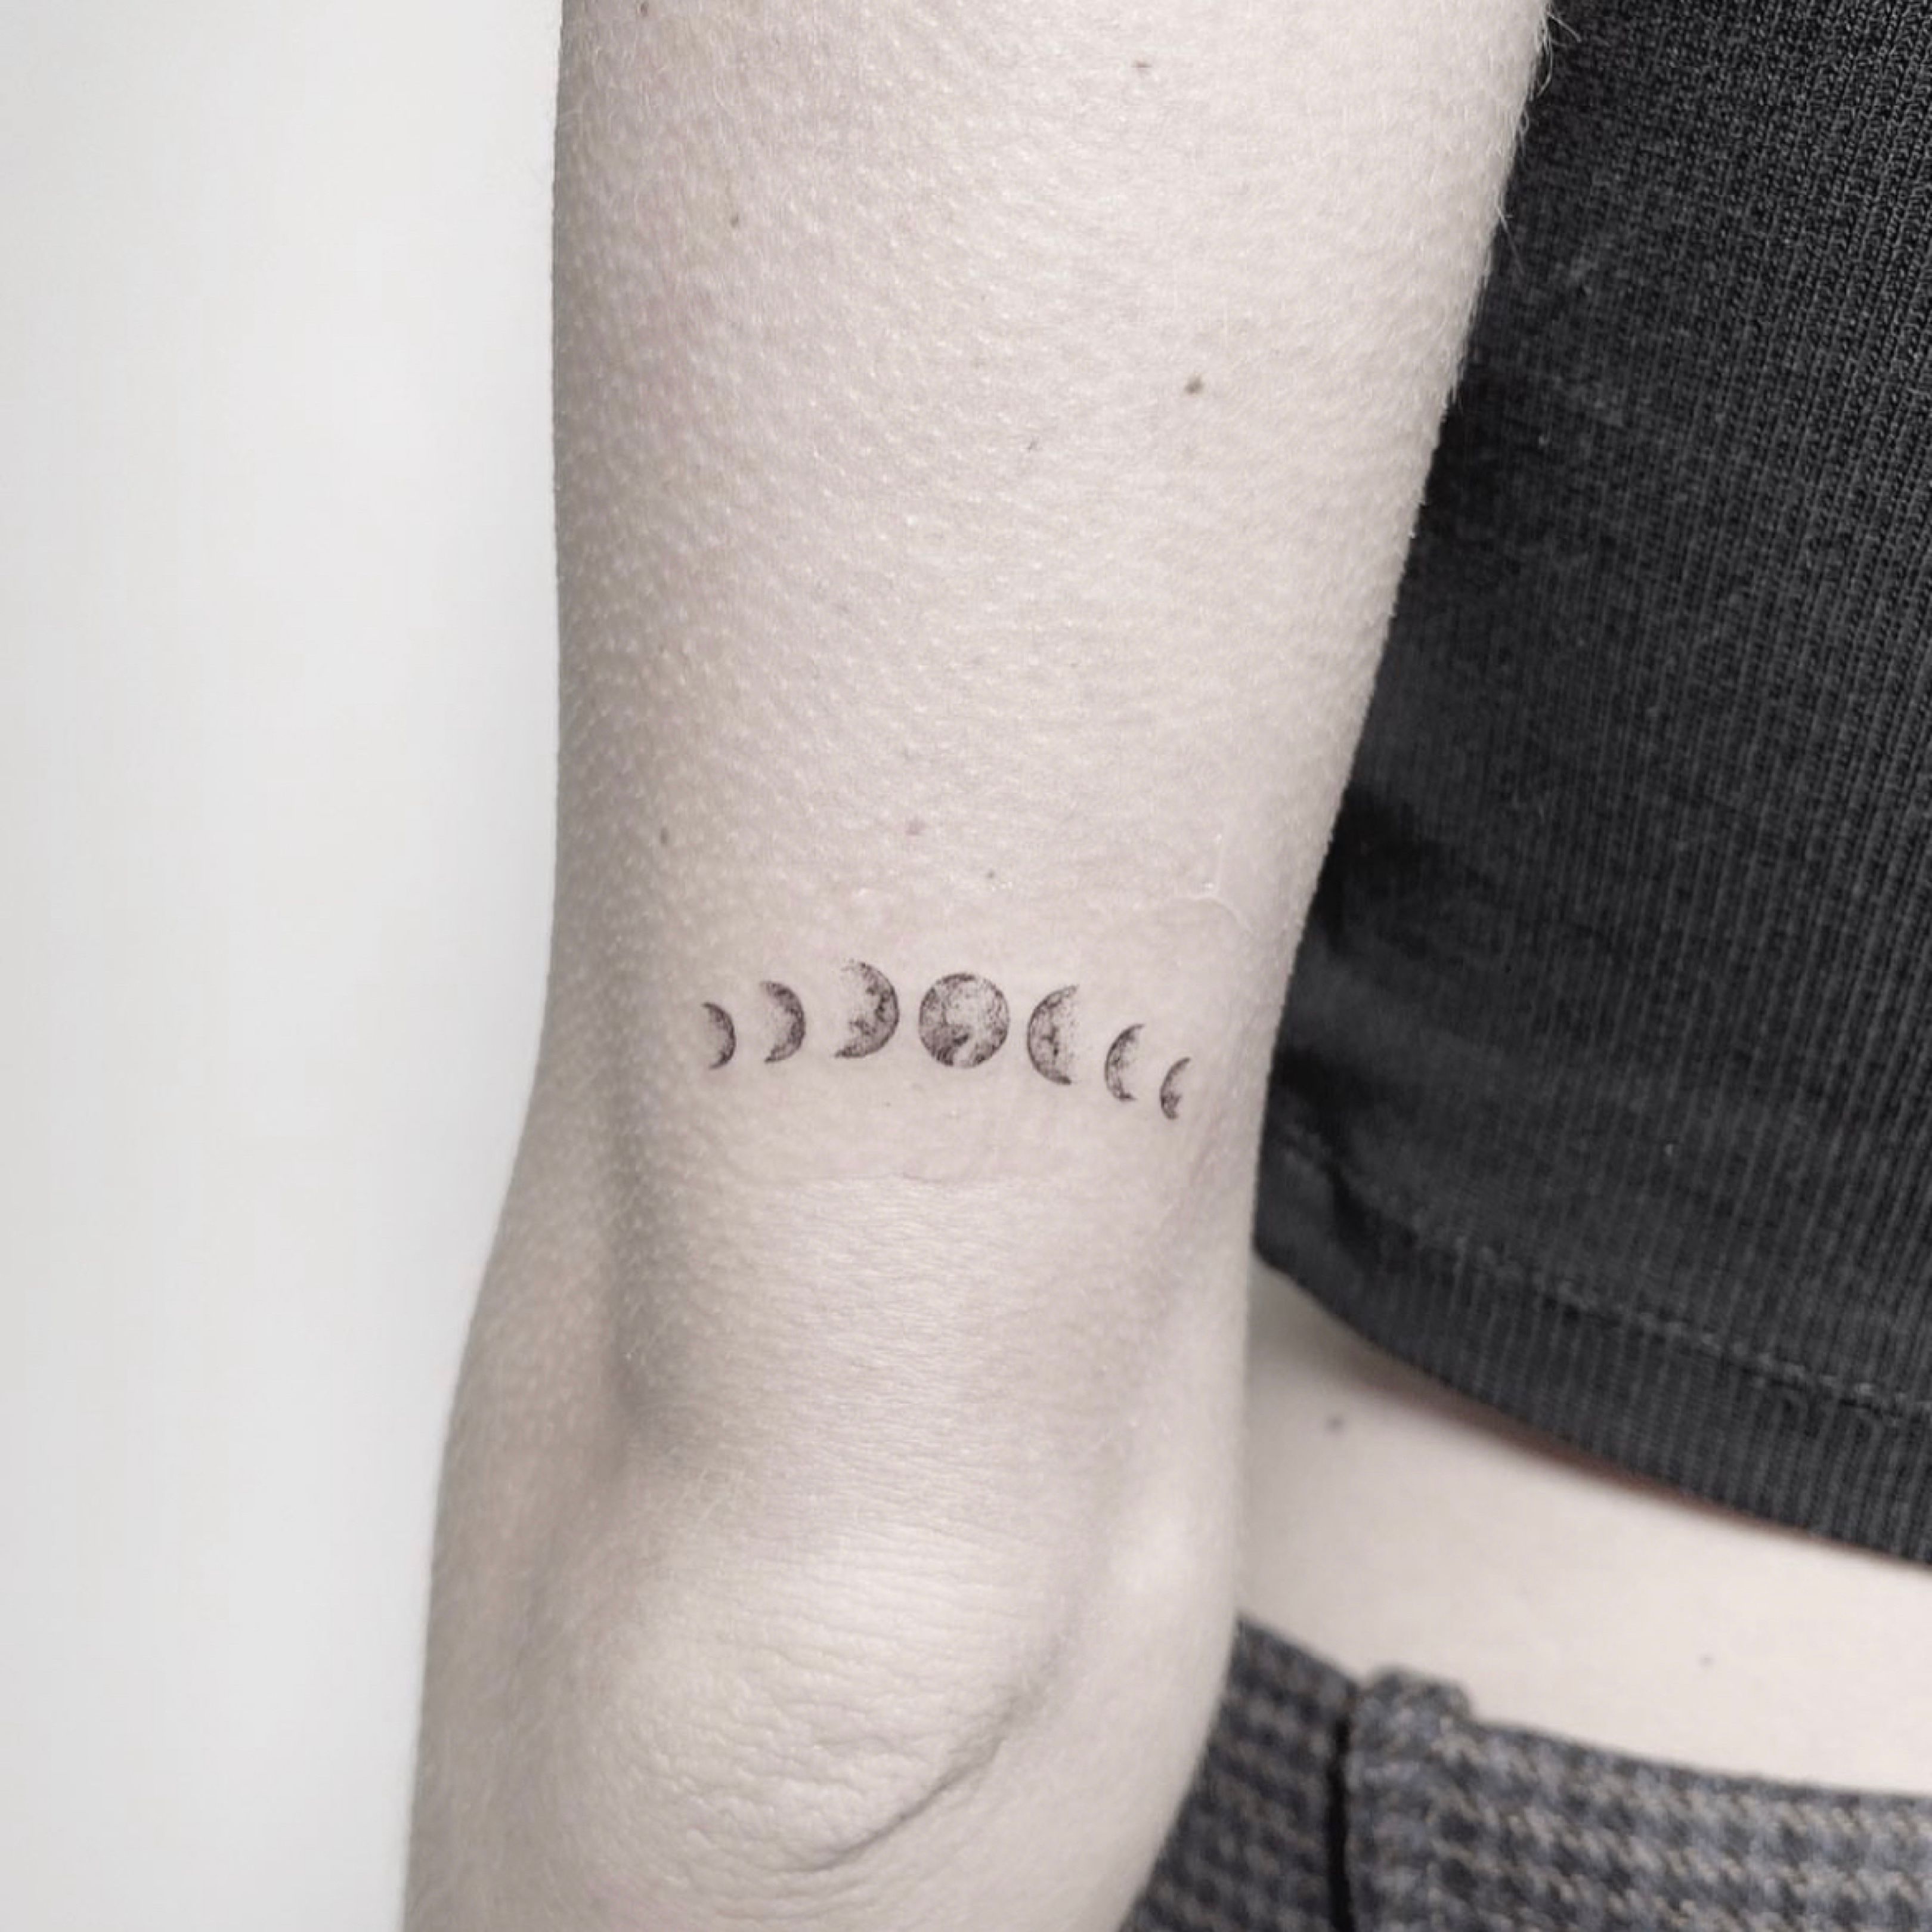 Ritual Moon Tattoo ritualmoontattoo  Instagram photos and videos